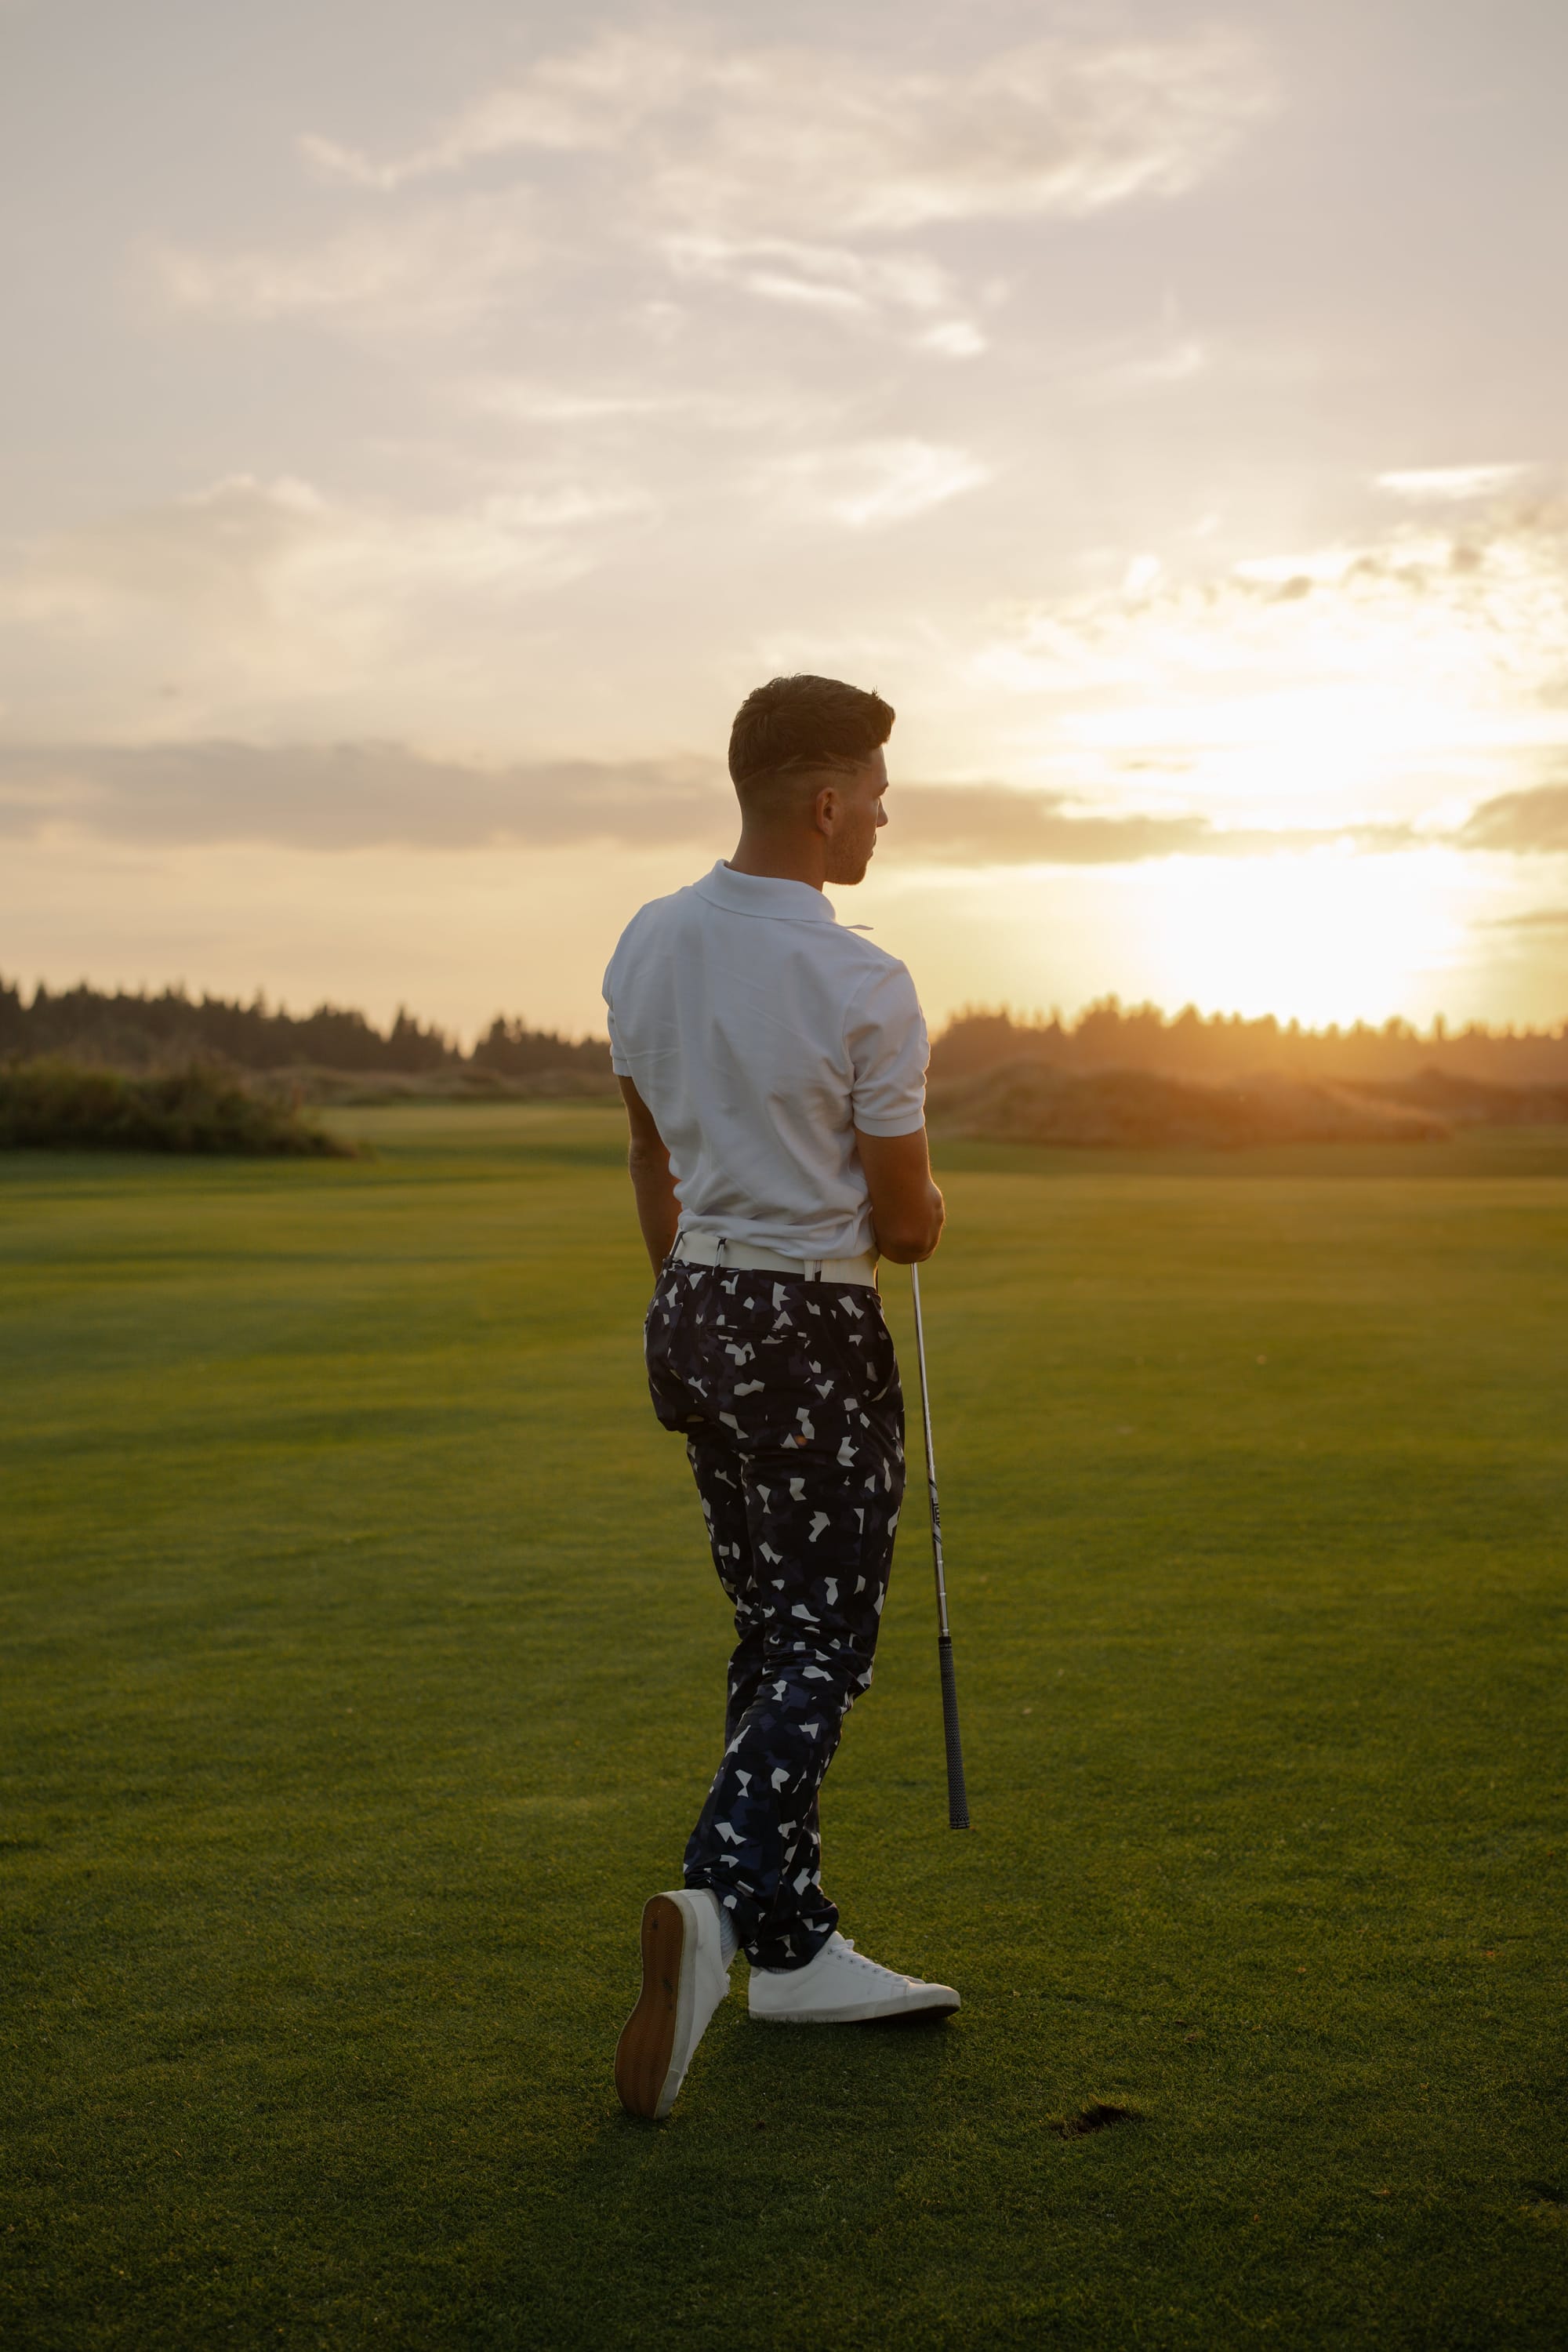 A male golfer holding a golf club and looking out towards a setting sun